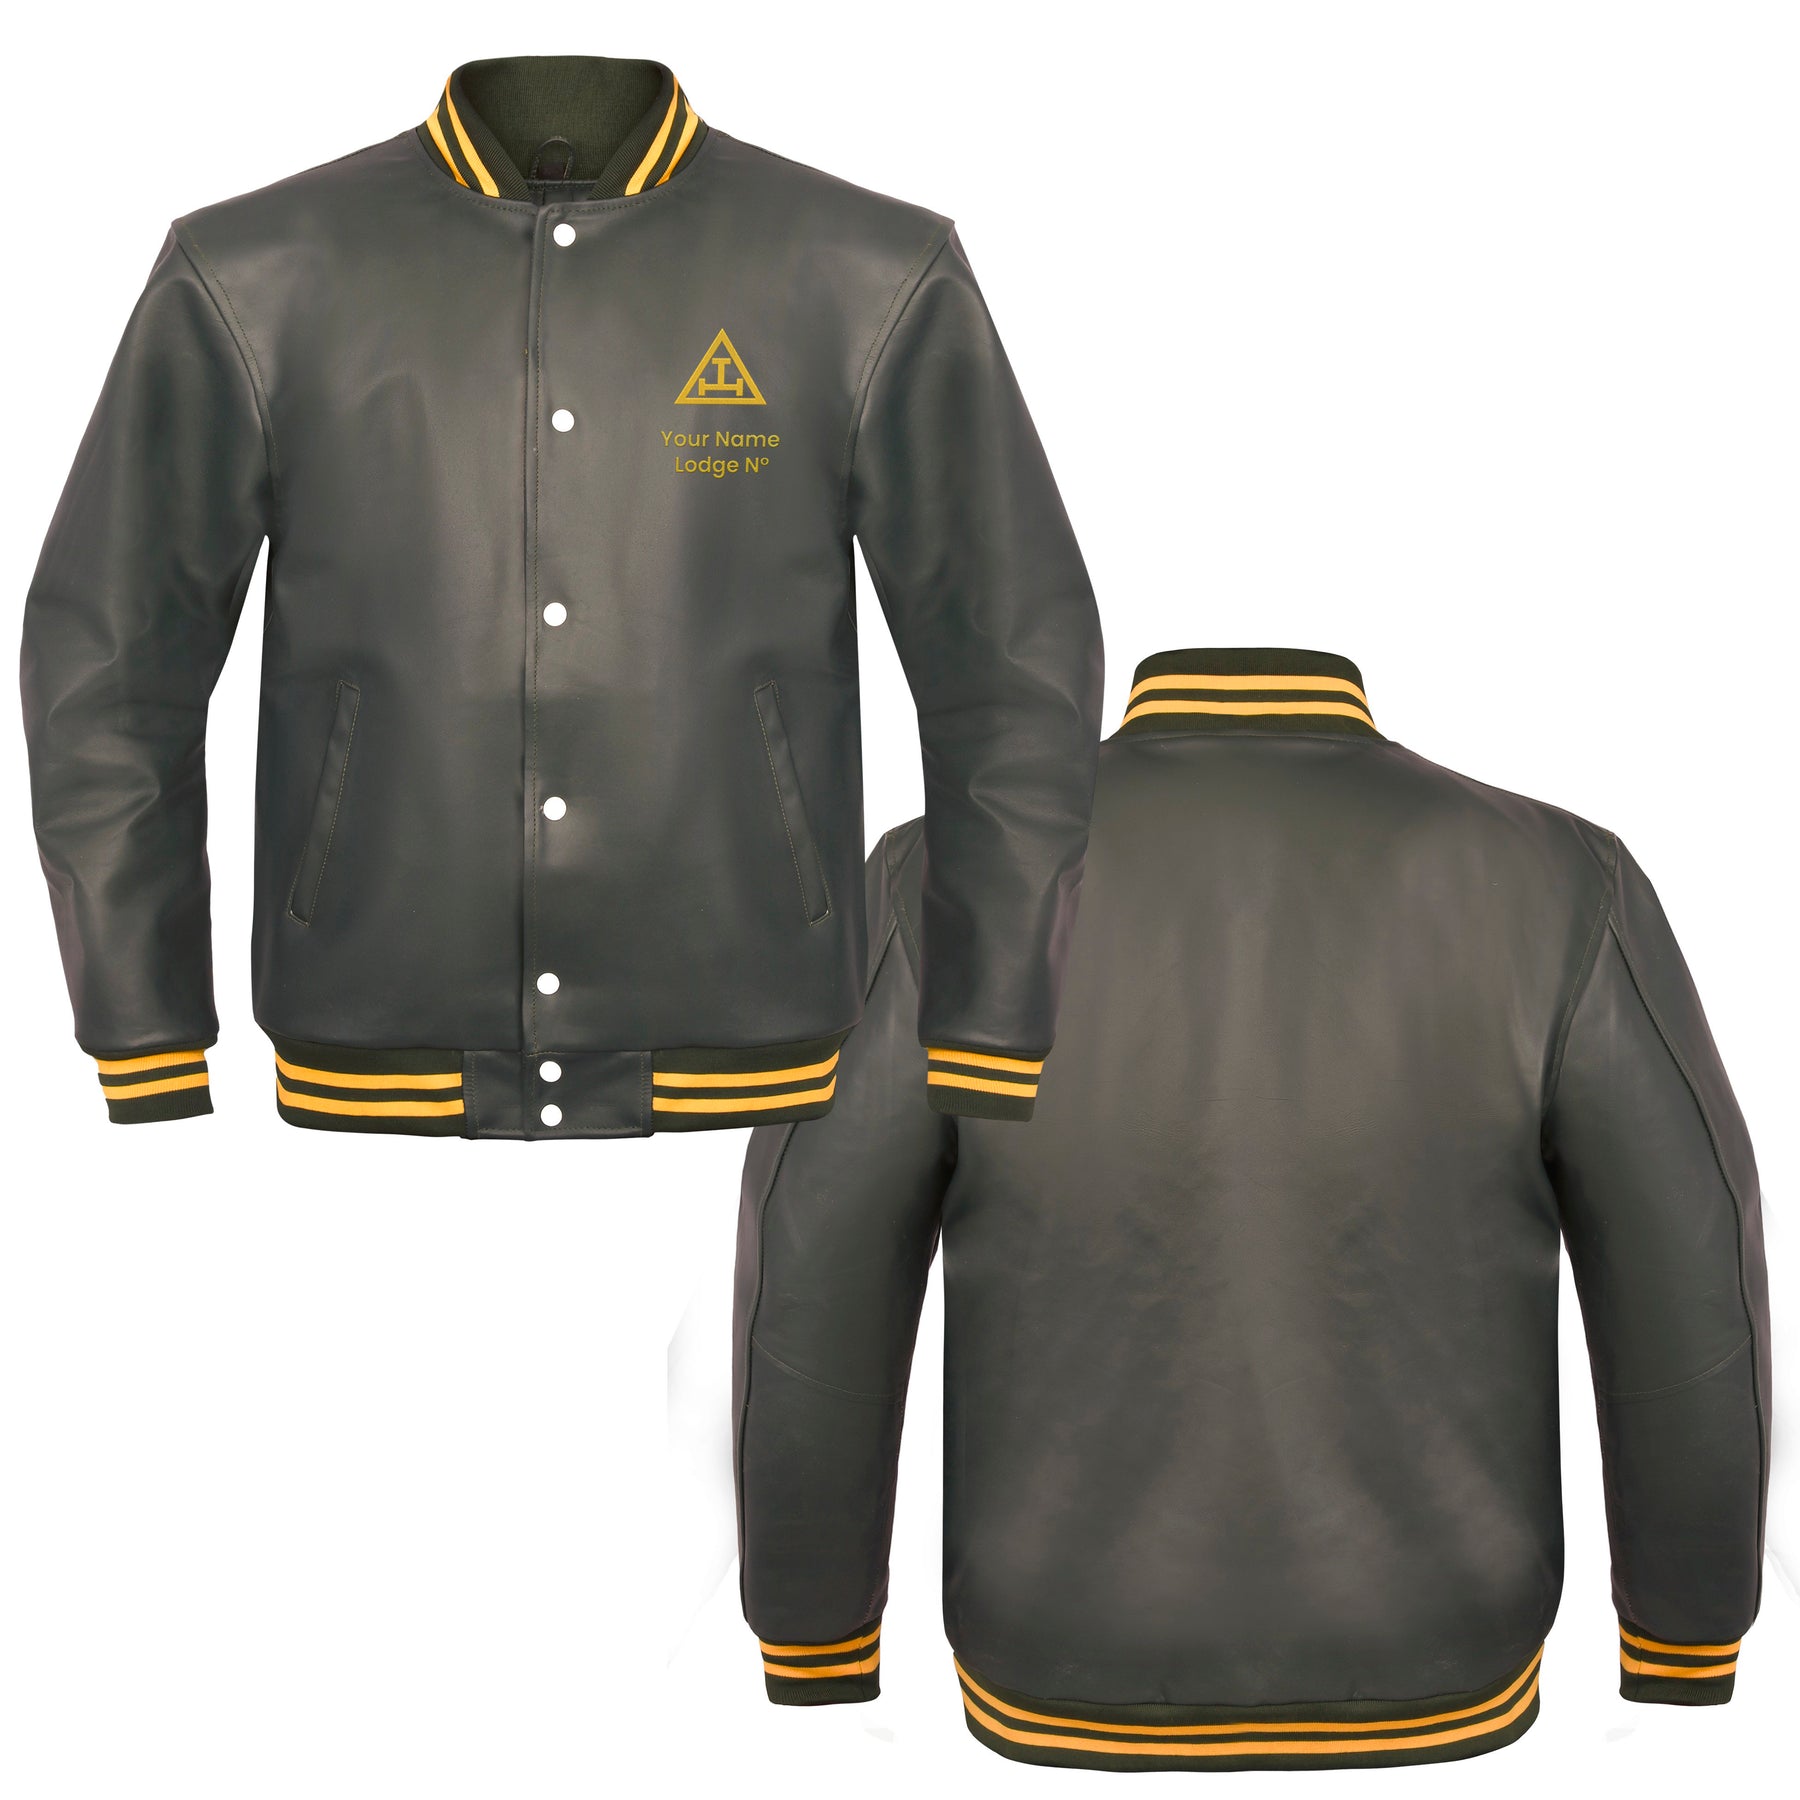 Royal Arch Chapter Jacket - Leather With Customizable Gold Embroidery - Bricks Masons